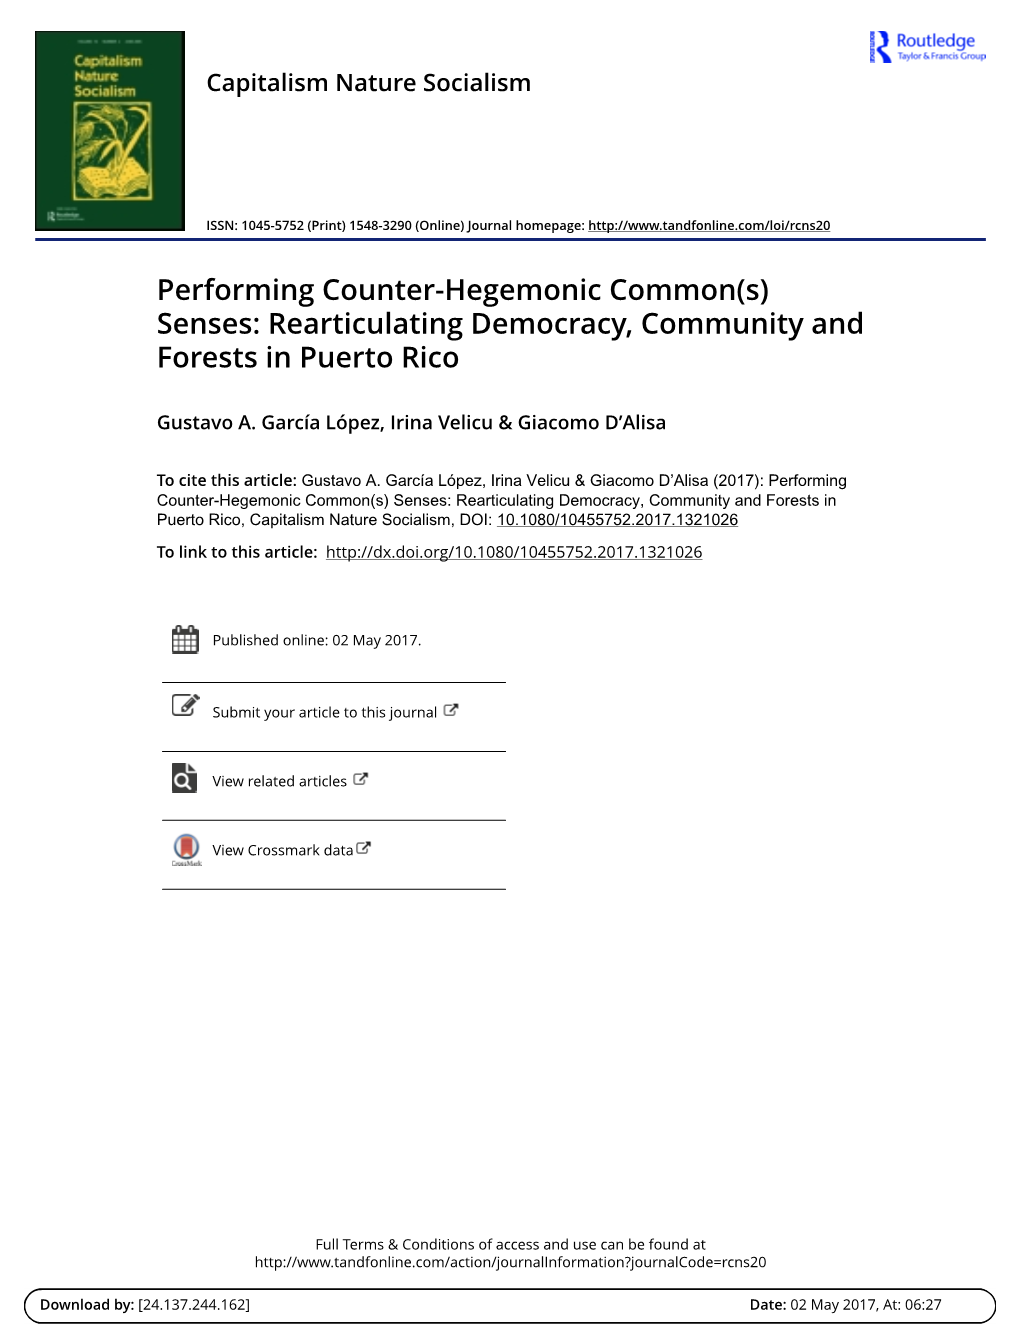 Performing Counter-Hegemonic Common(S) Senses: Rearticulating Democracy, Community and Forests in Puerto Rico